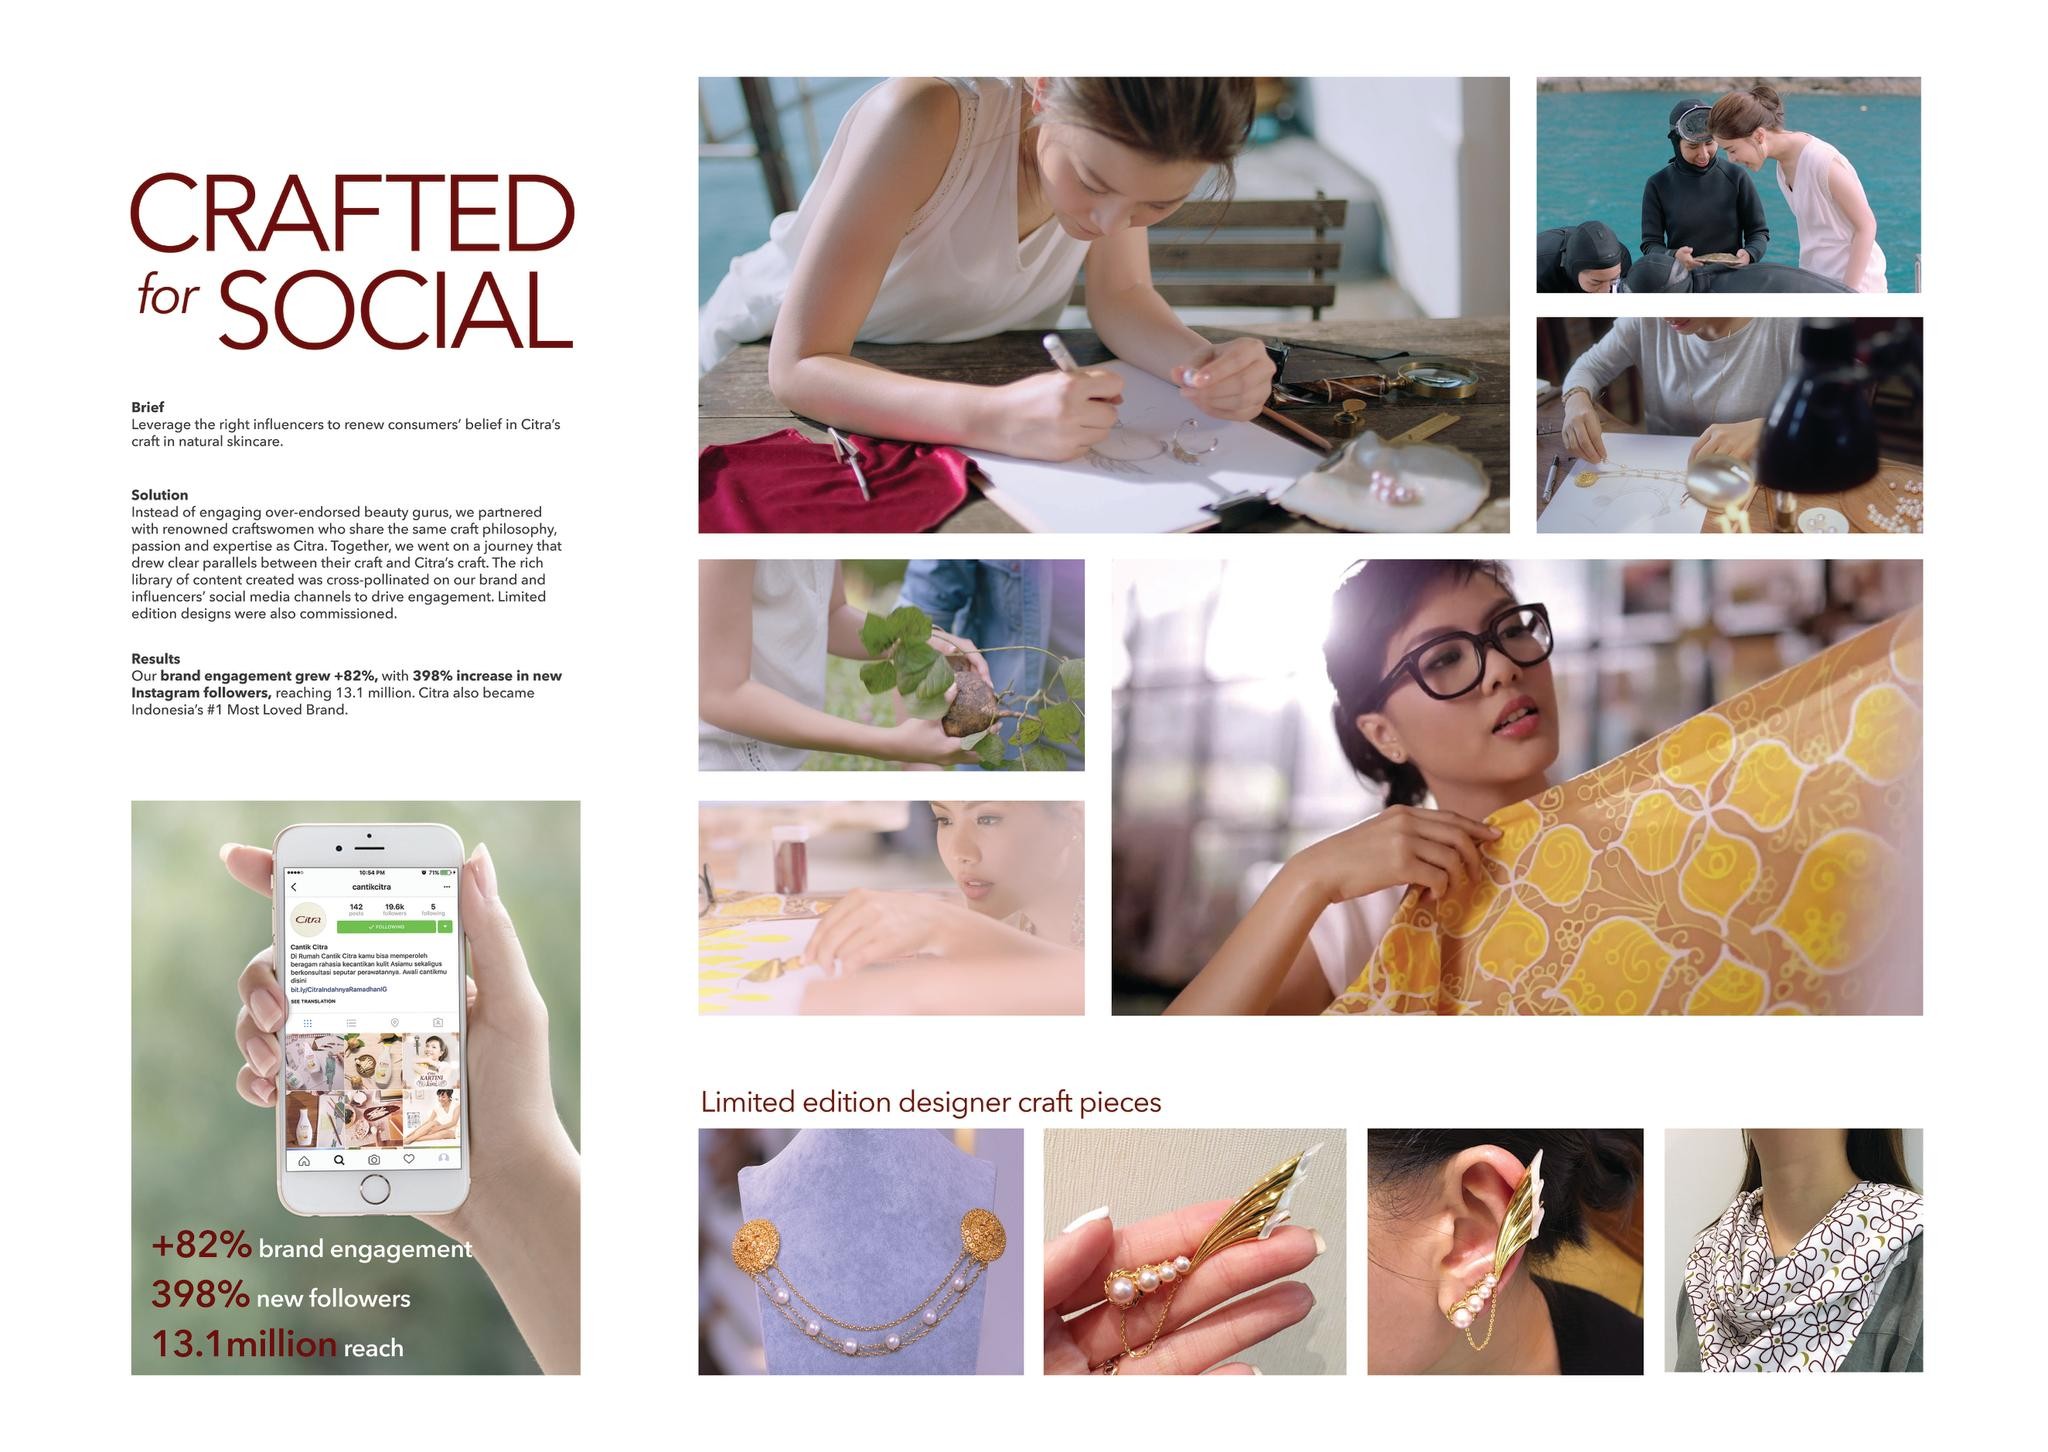 CRAFTED FOR SOCIAL